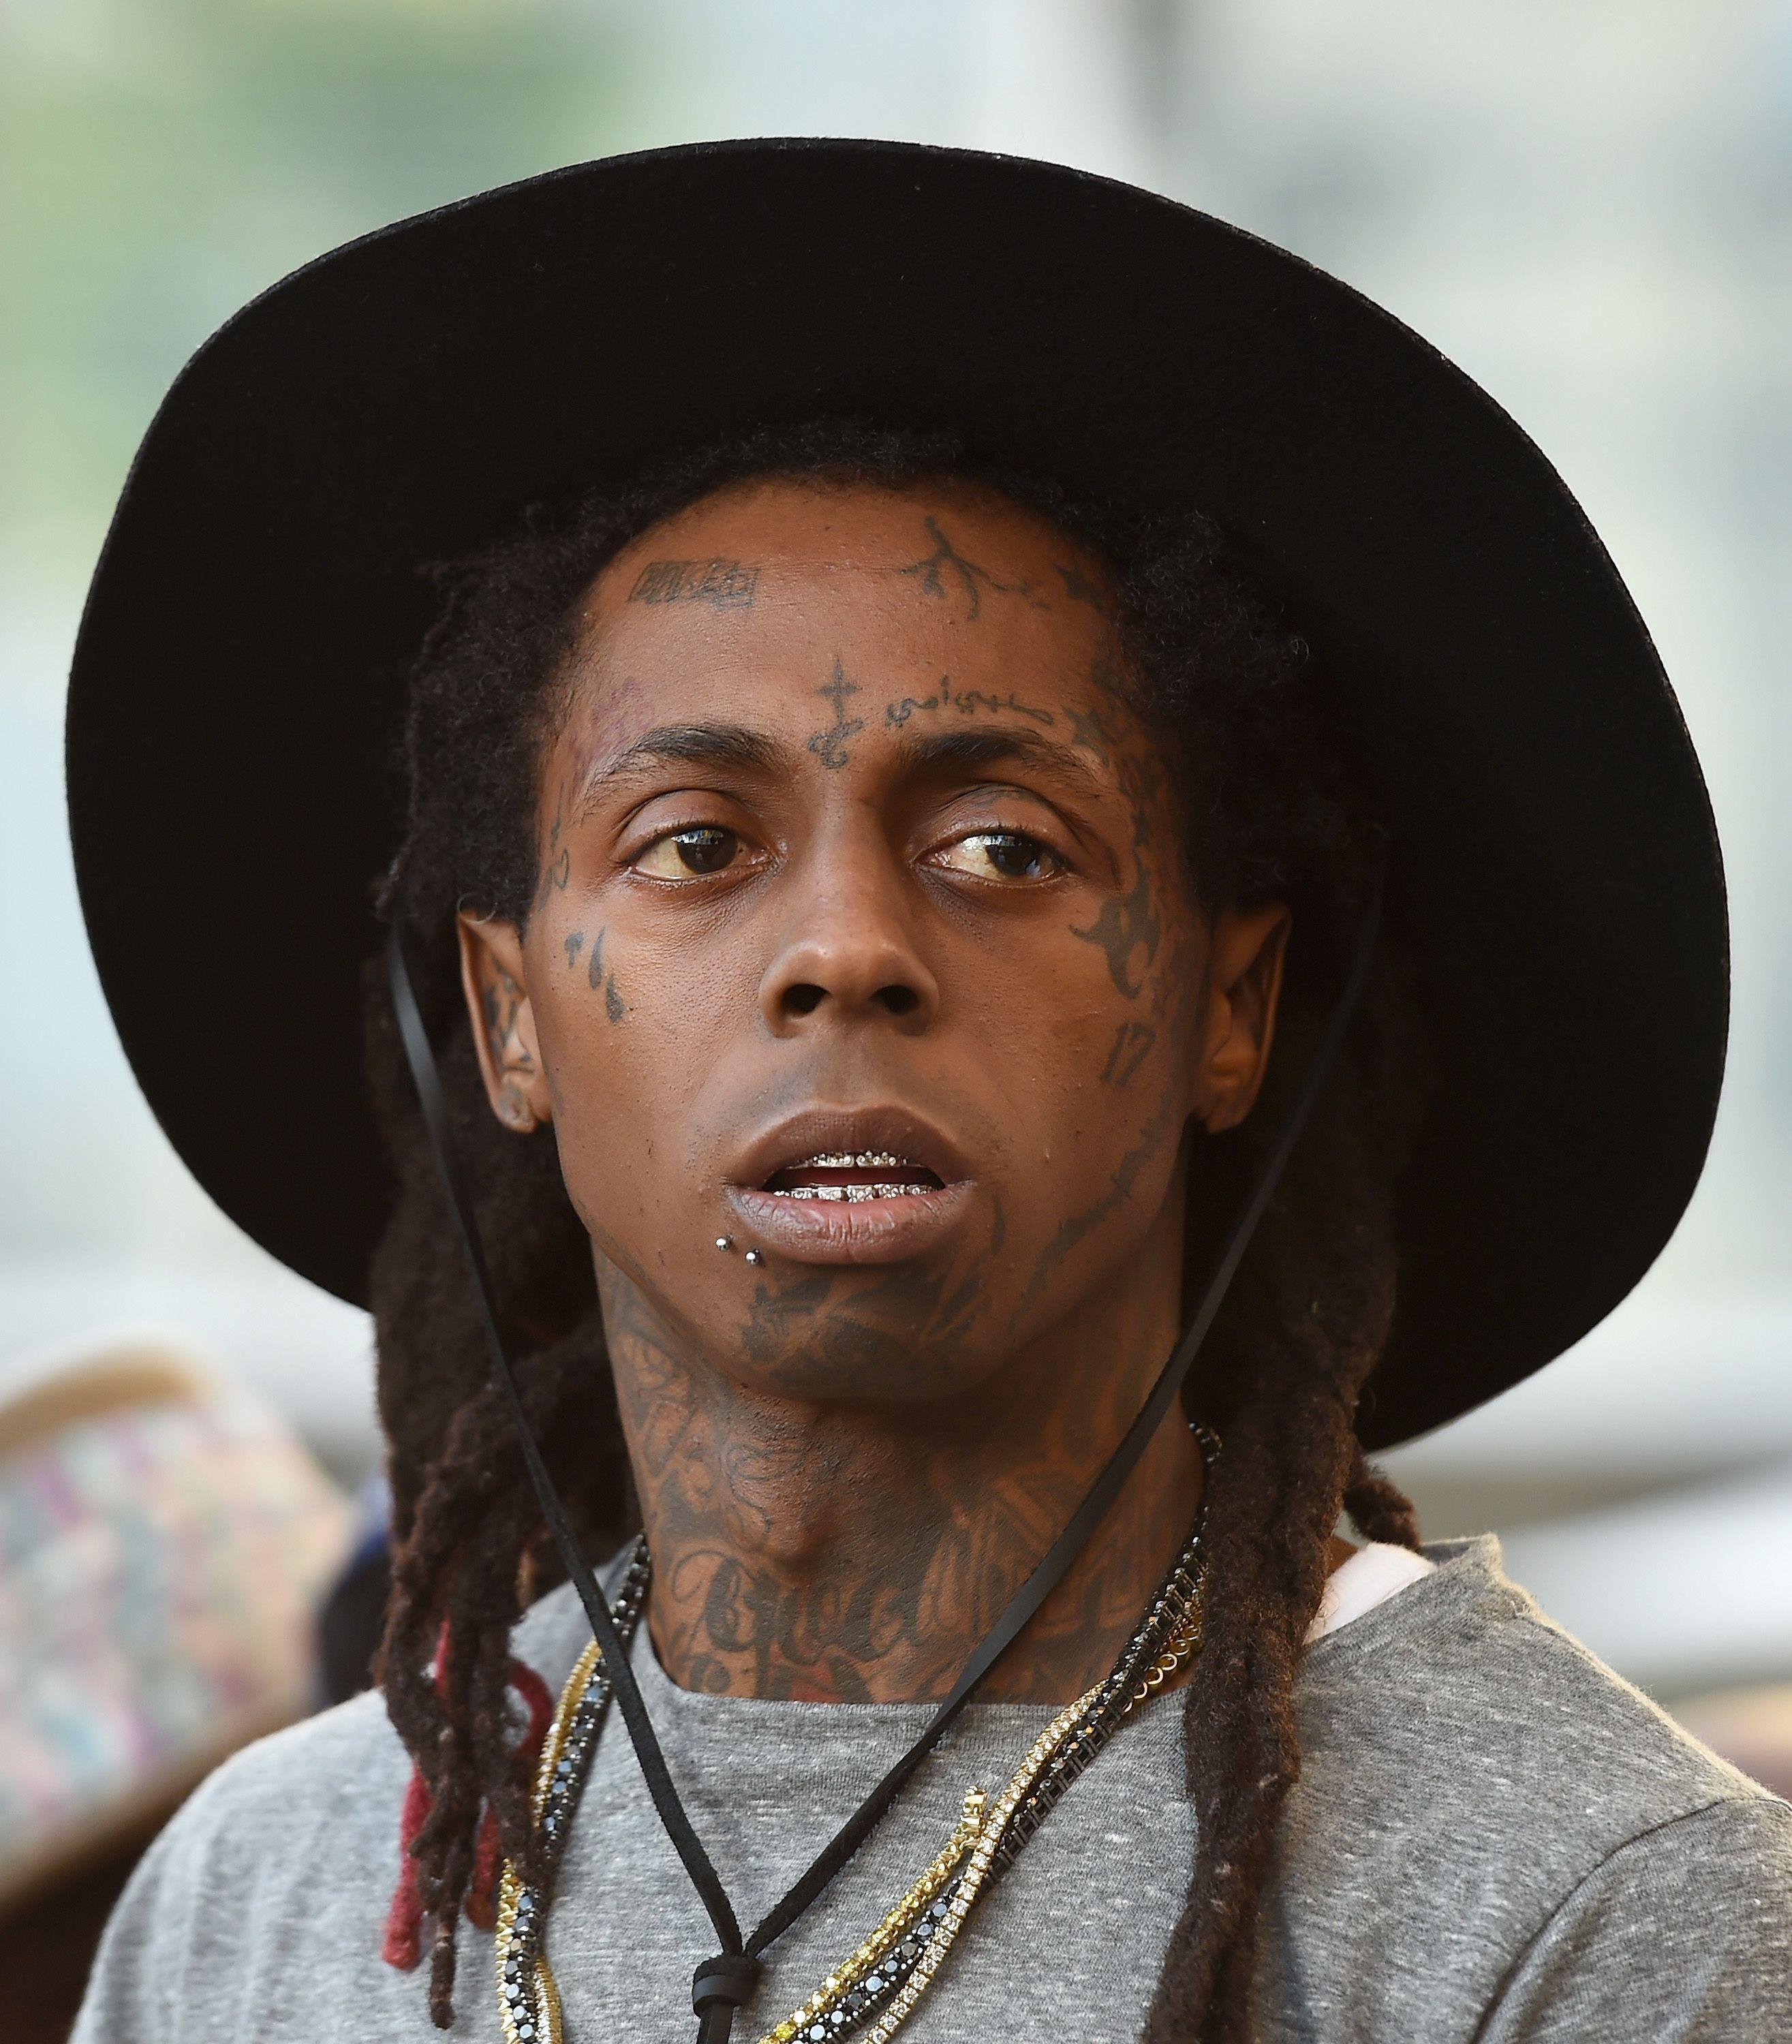 This Guy Is Trying To Look Just Like Lil Wayne! People Are Calling